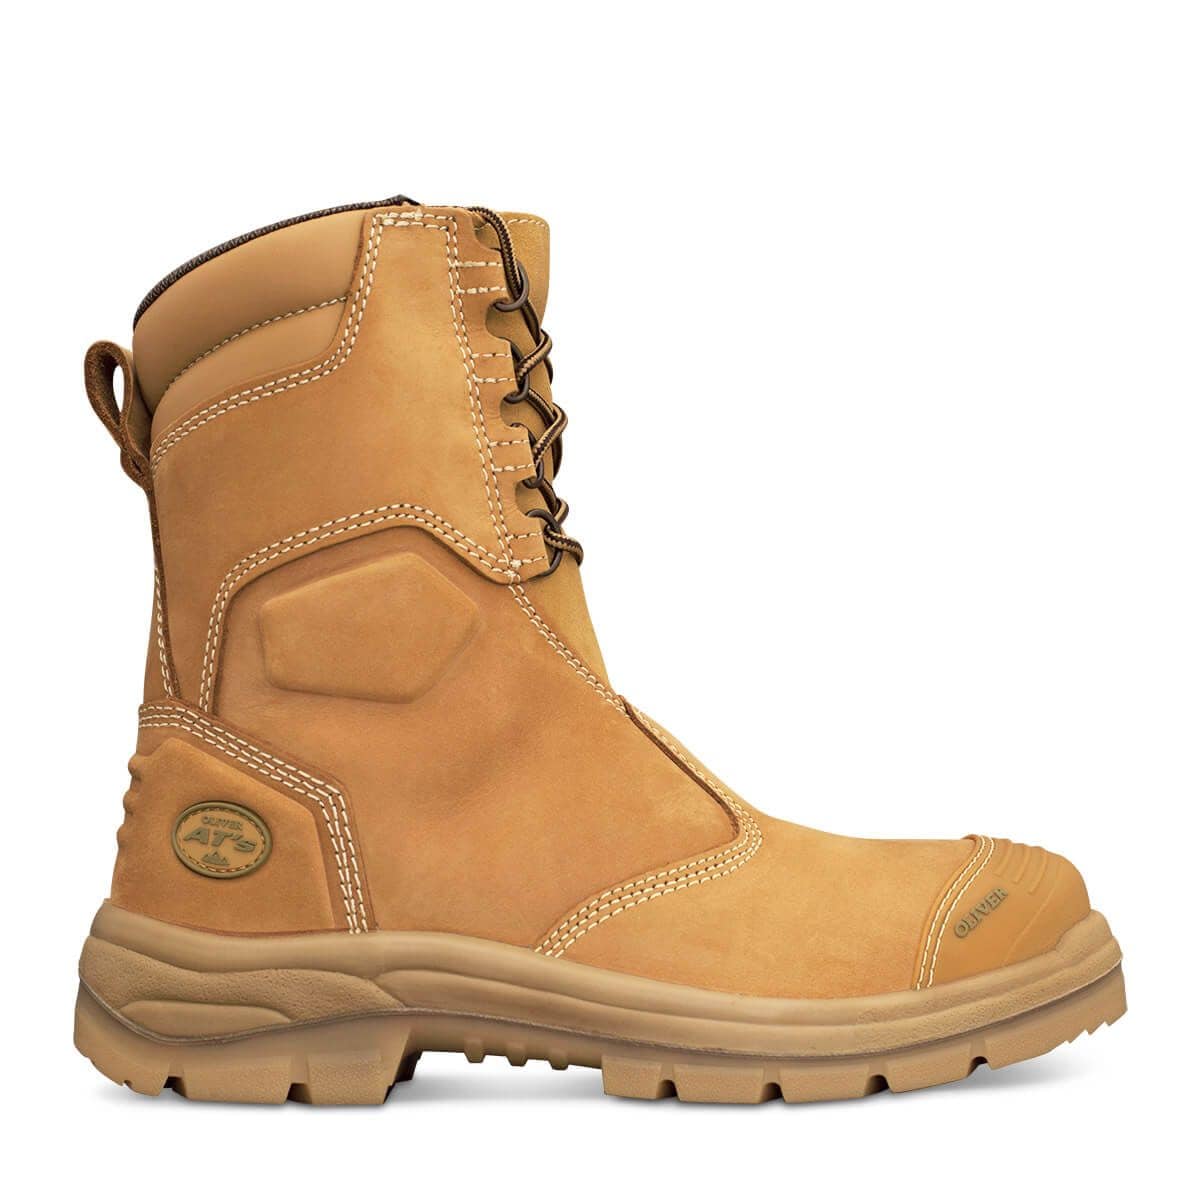 Oliver Mens 55-385 200mm Zip at Boots Steel Bump Nitrile Wheat 5